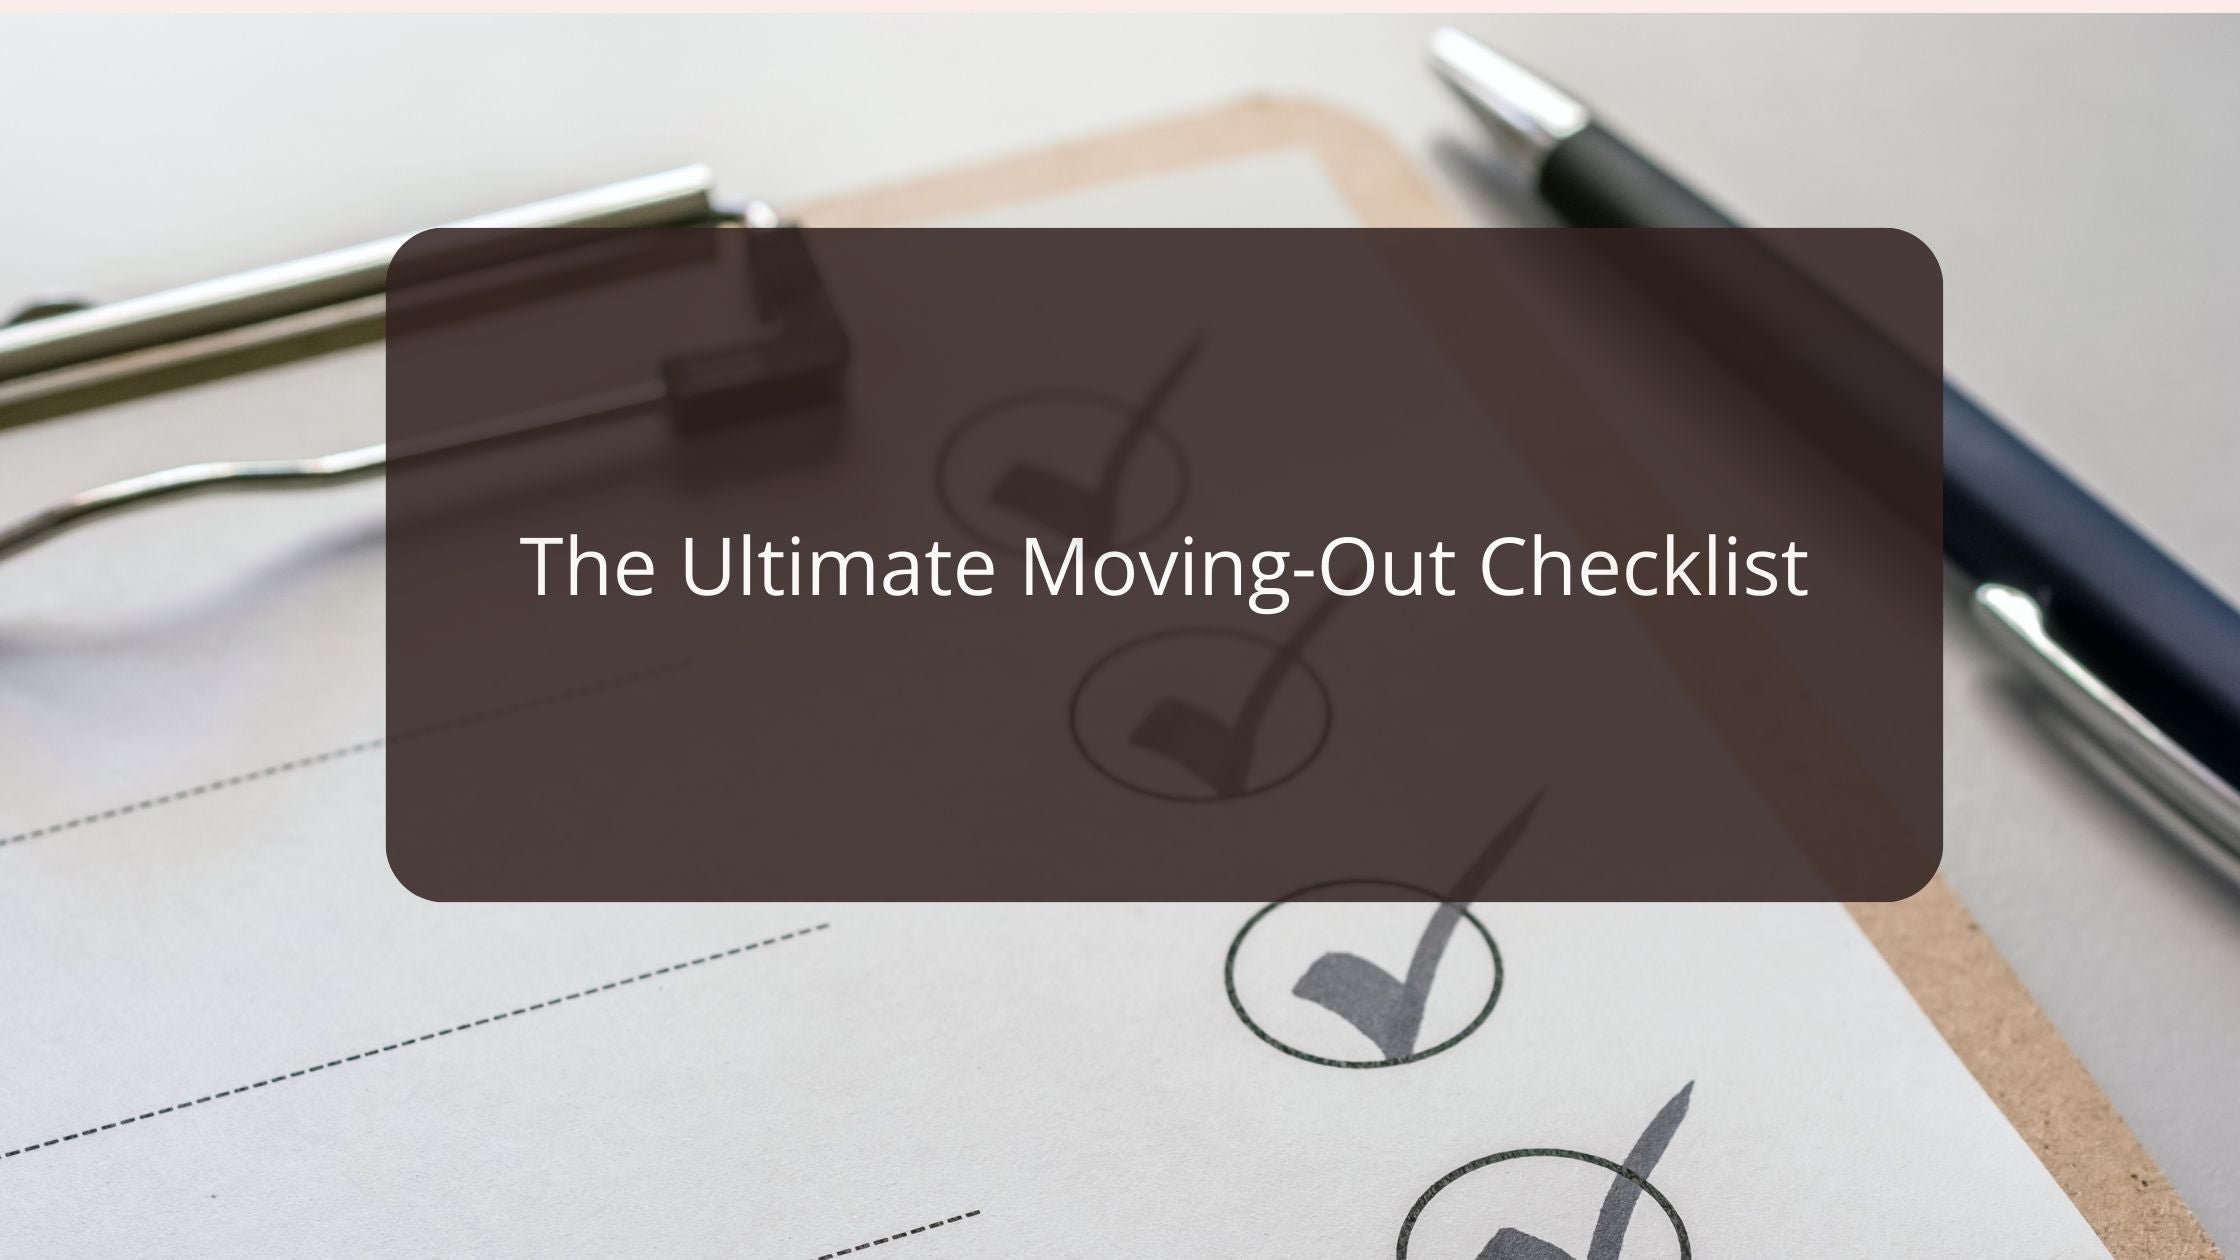 The Ultimate Moving-Out Checklist